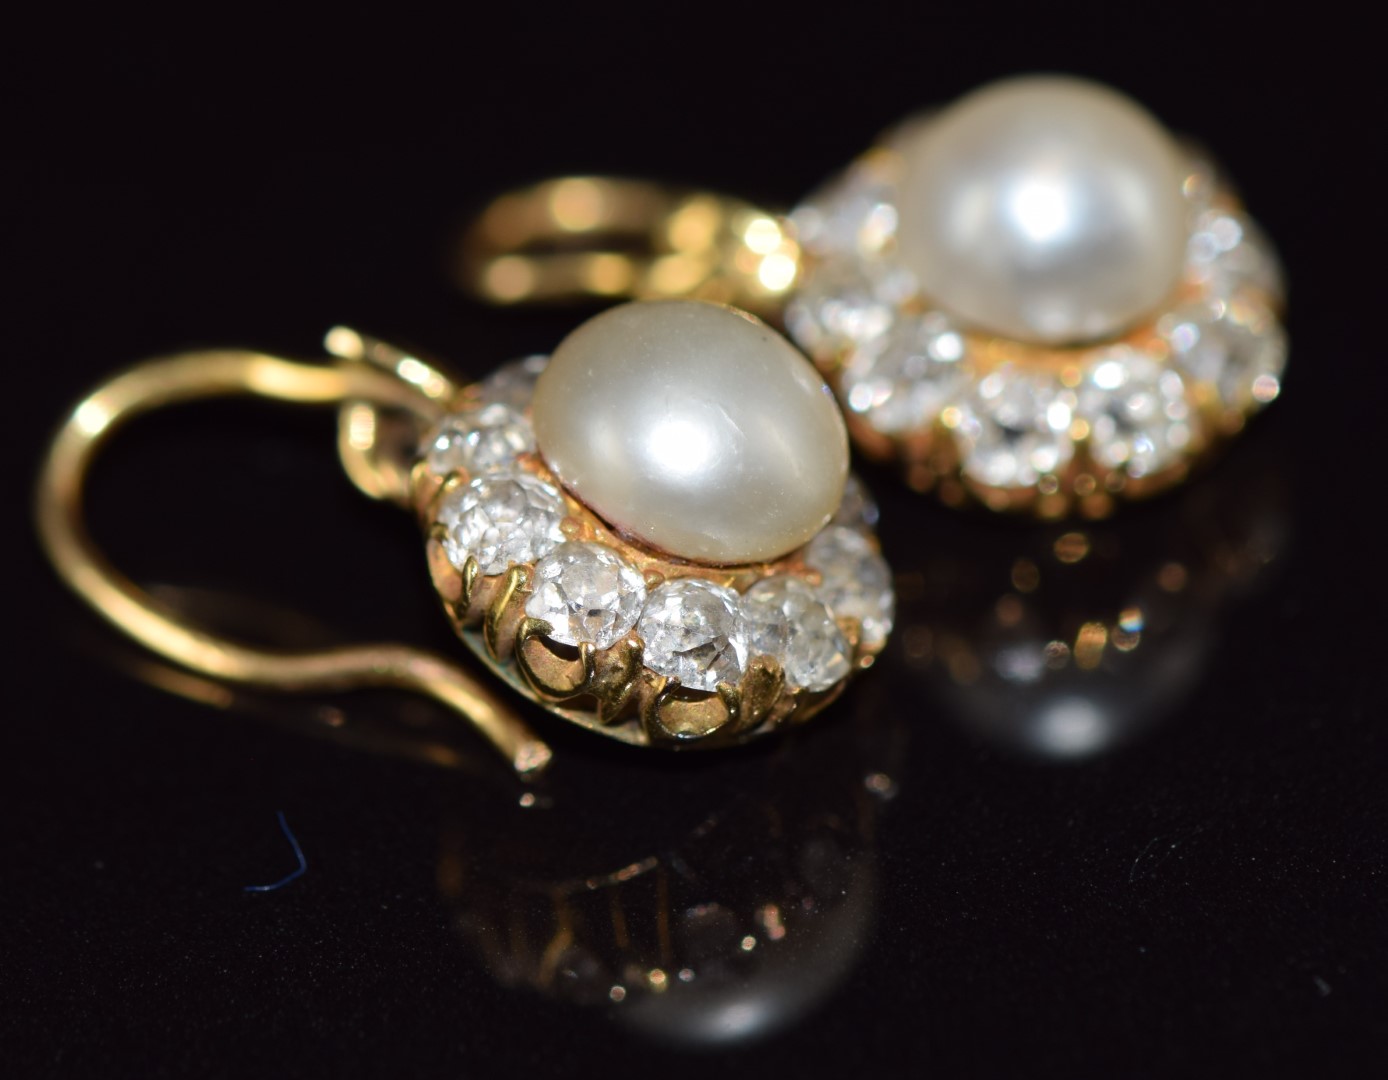 A pair of c1900 18ct gold earrings, each set with a natural pearl measuring 6.4mm surrounded by - Image 3 of 5